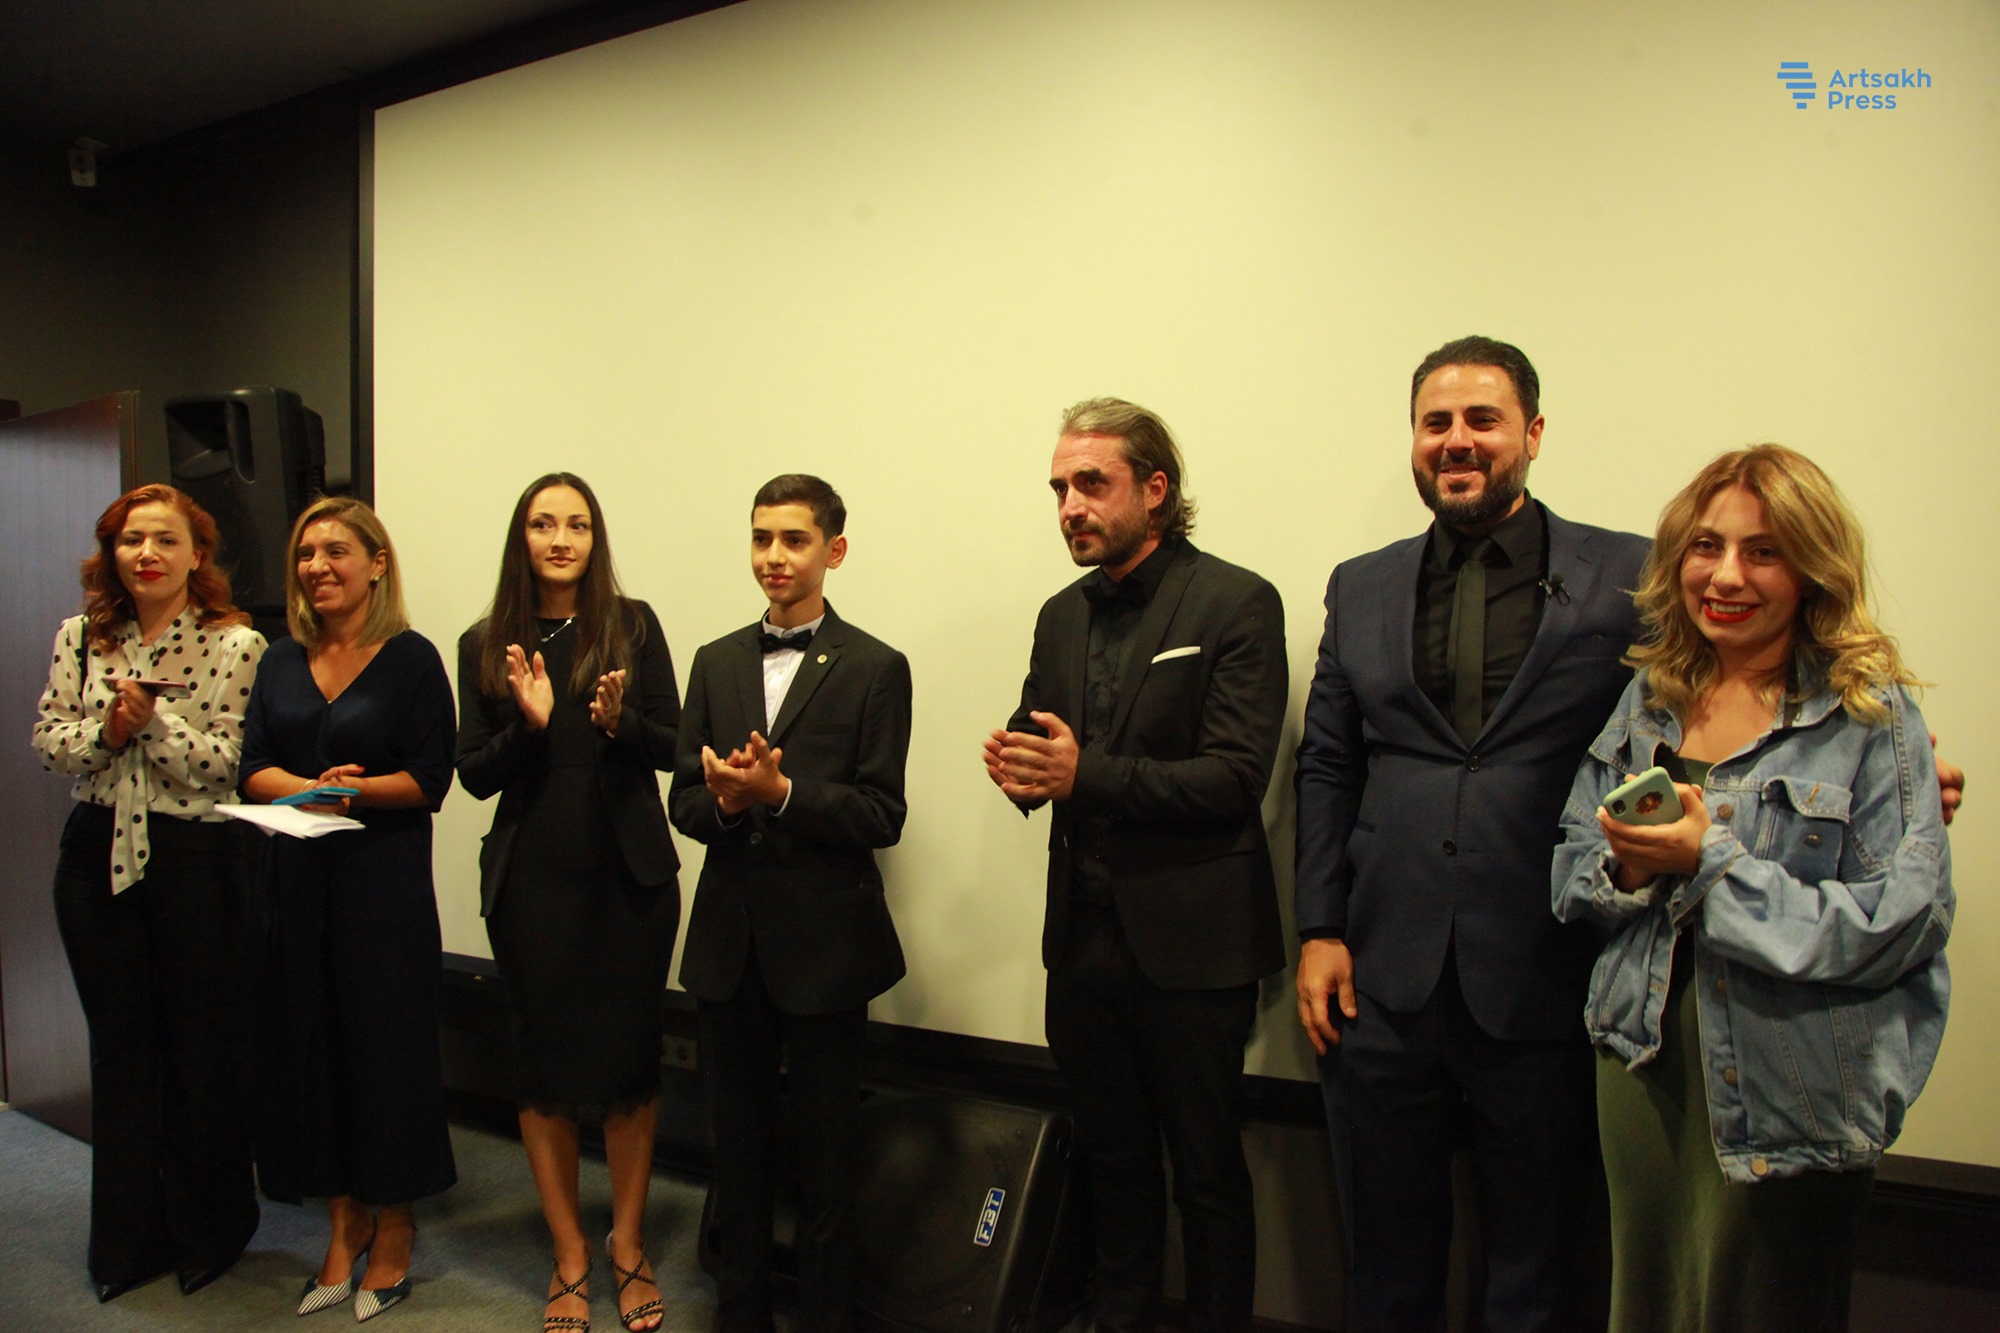 The screening of the film “Solomon’s Songs” took place in Stepanakert